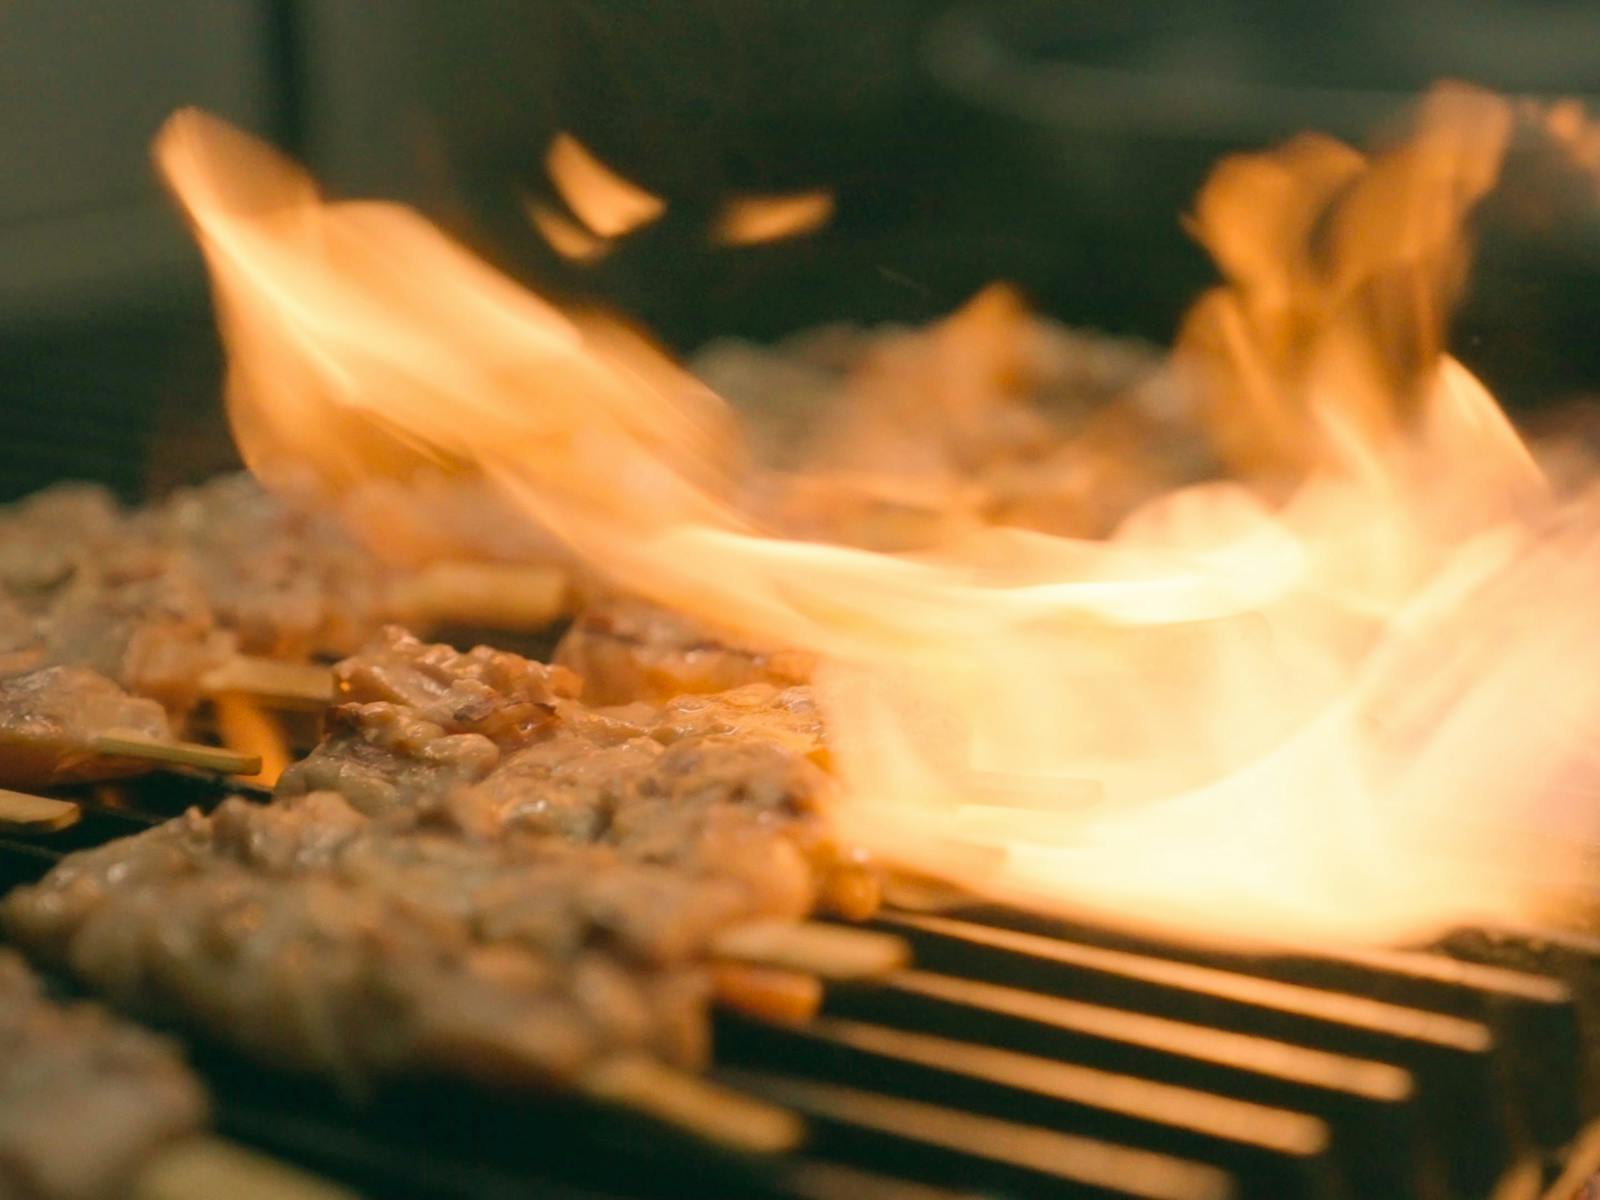 chicken schewers being cooked on the grill plate with flame in the background